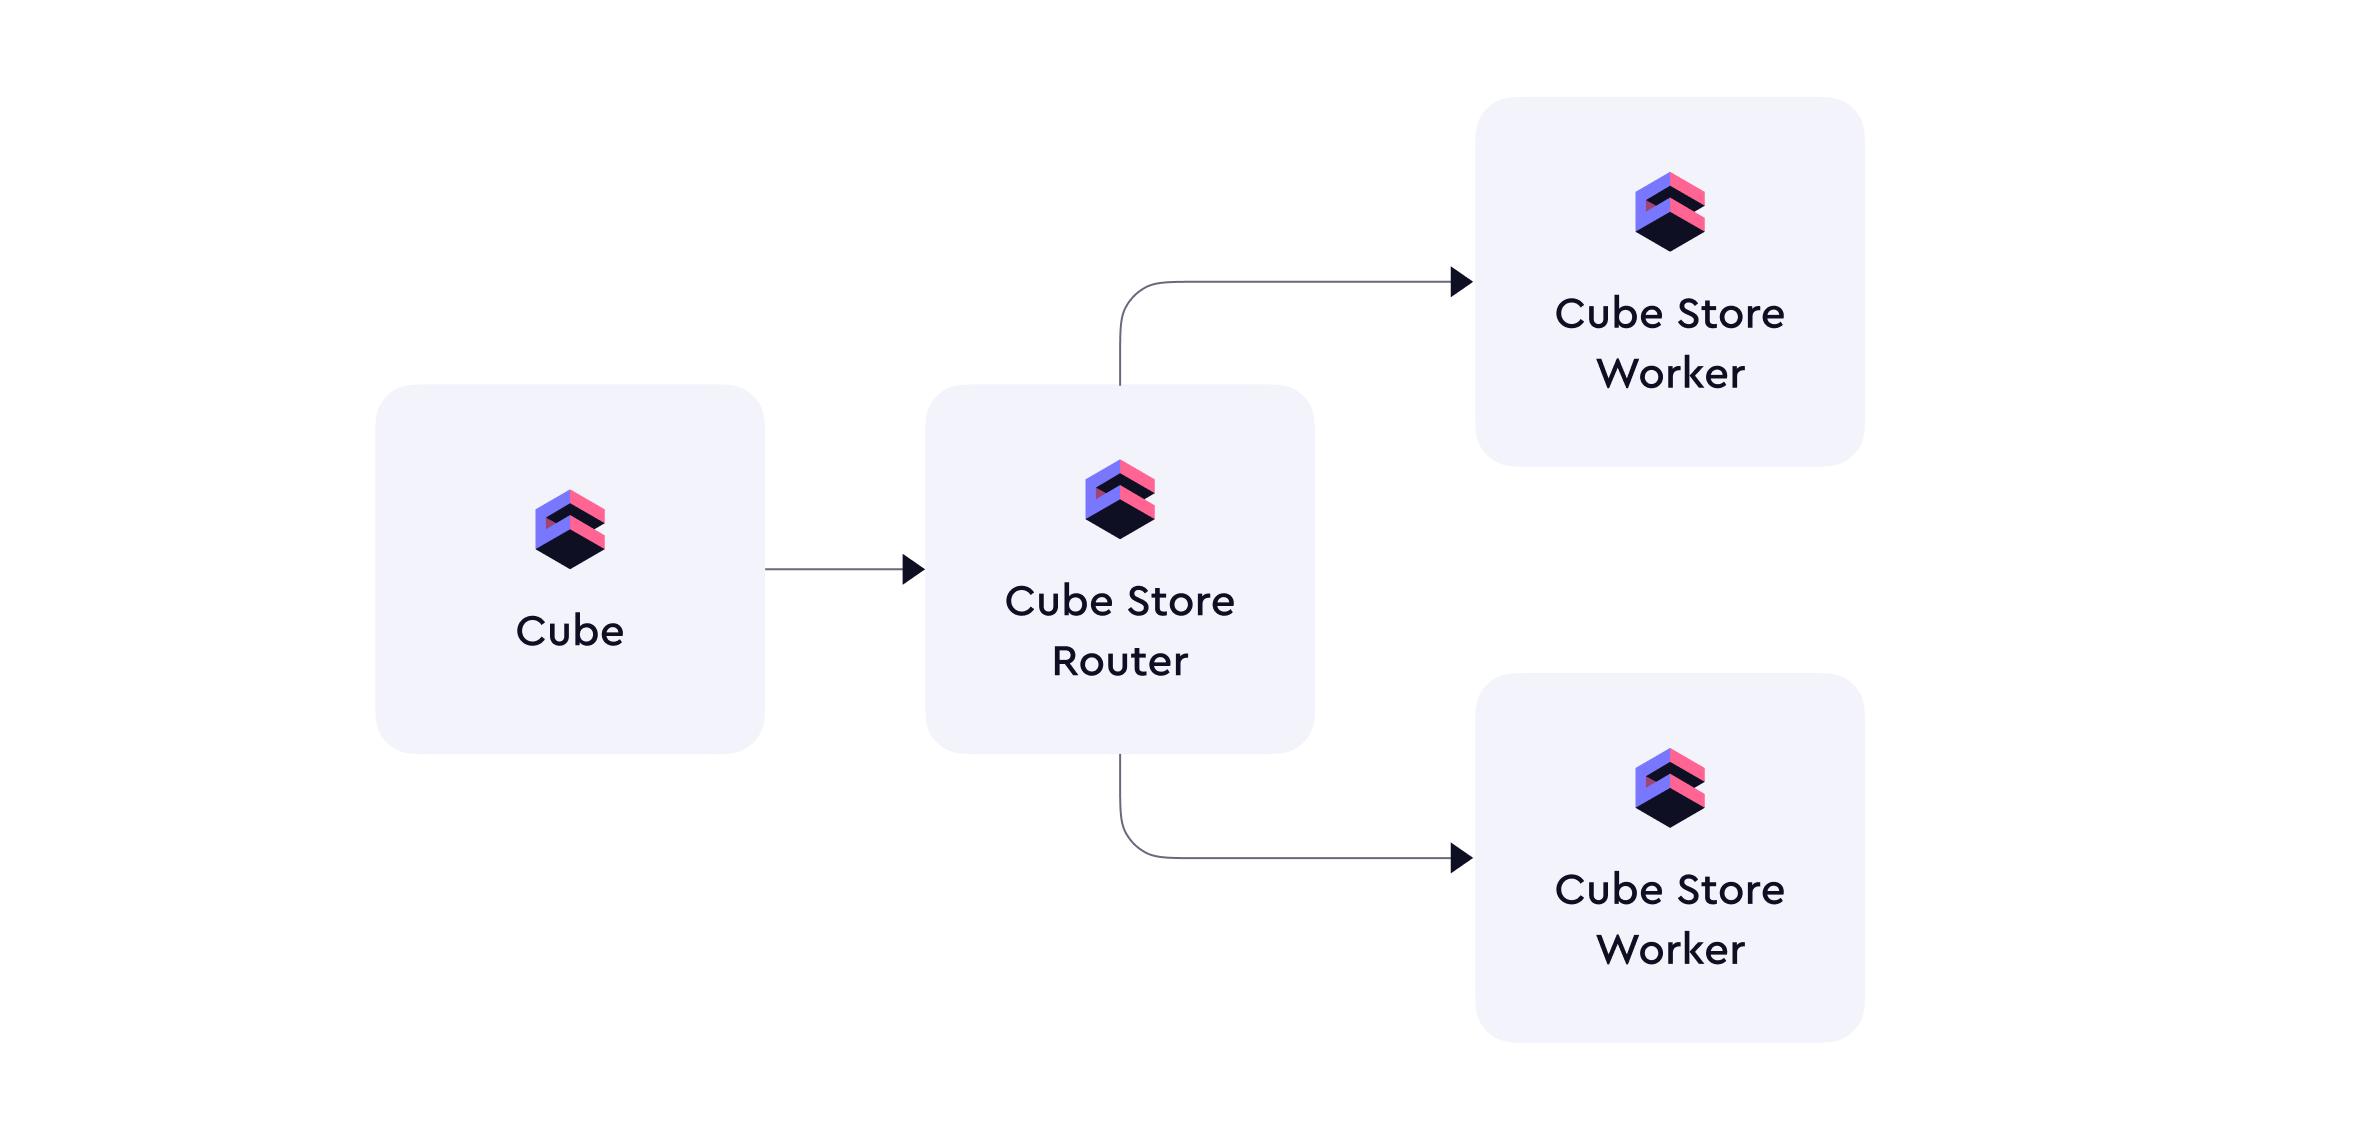 Cube Store Router with two Cube Store Workers